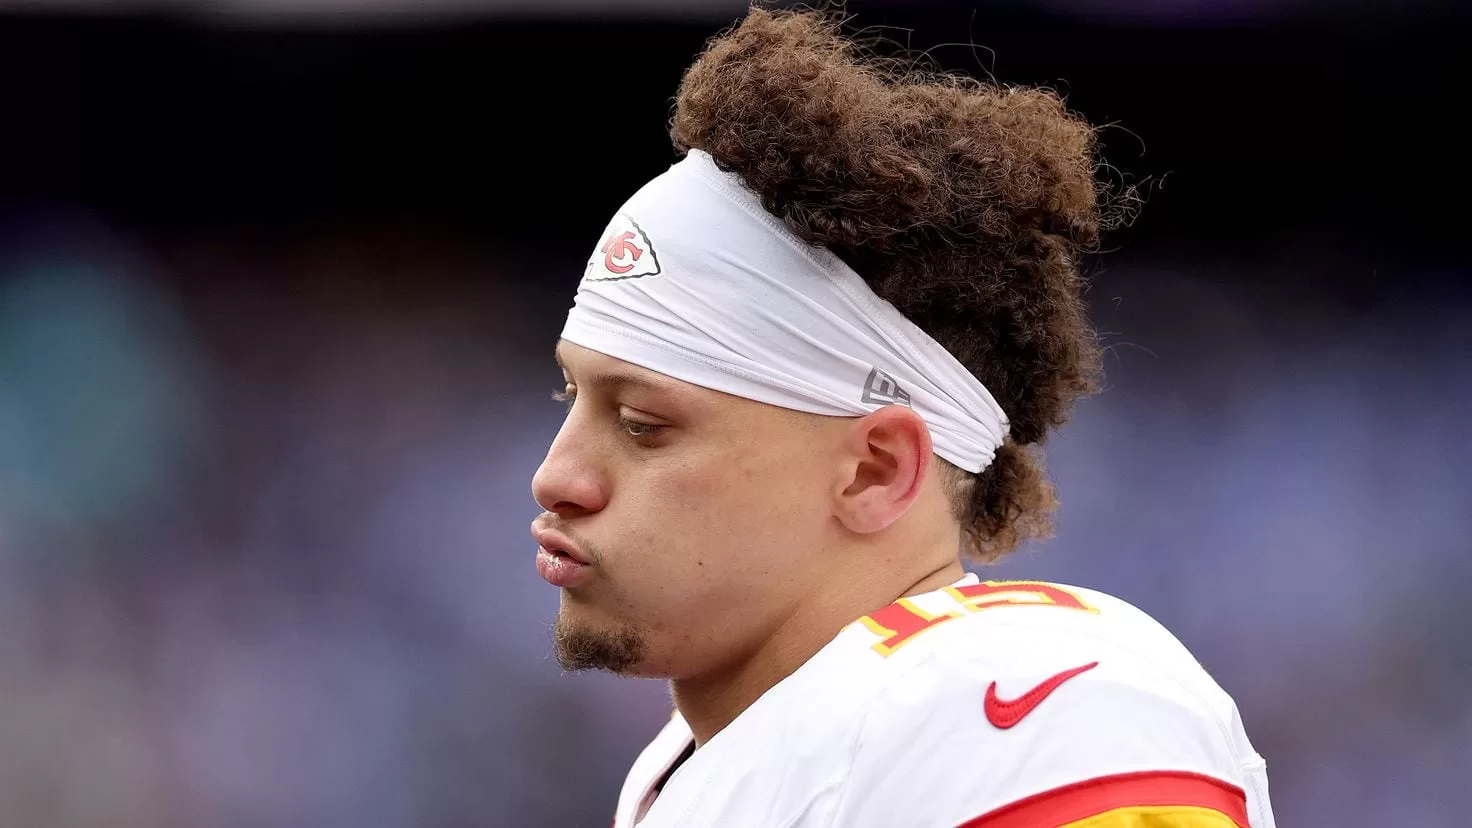 Patrick Mahomes' father arrested for drunk driving
